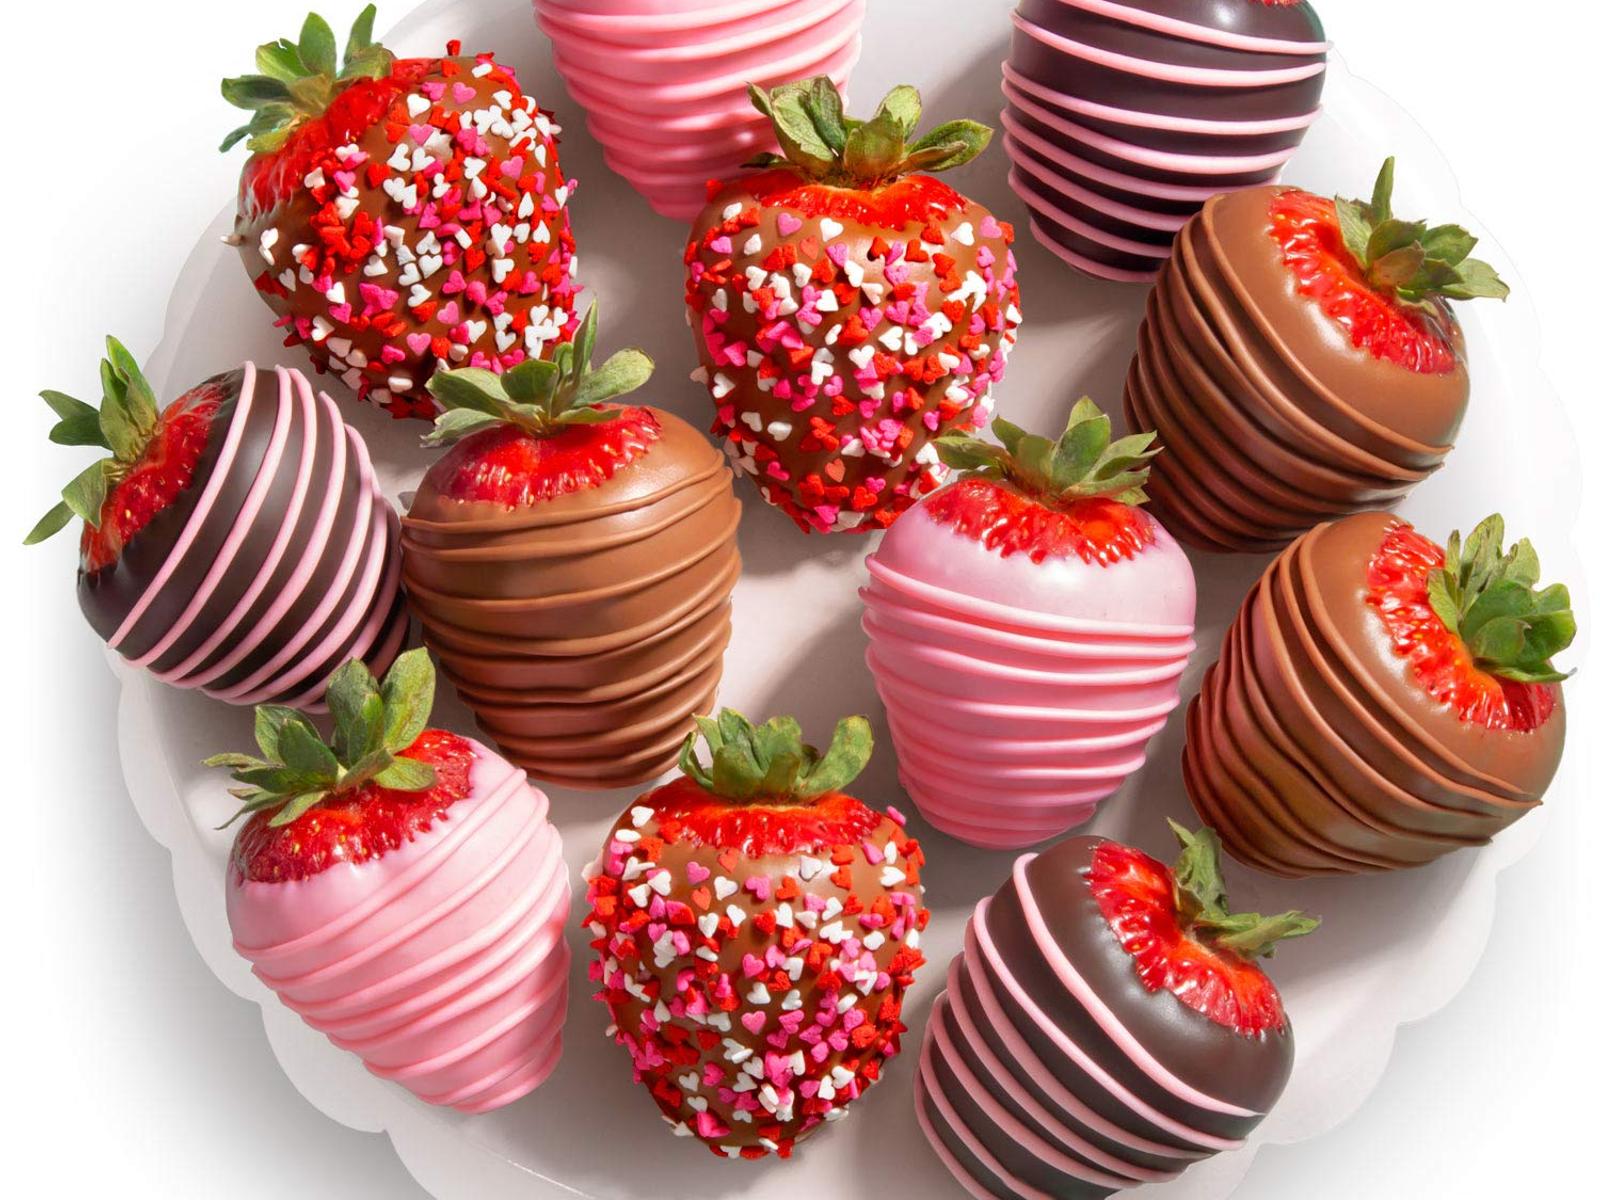 Download Delicious strawberry cover with chocolate - Love time 1600x1200.